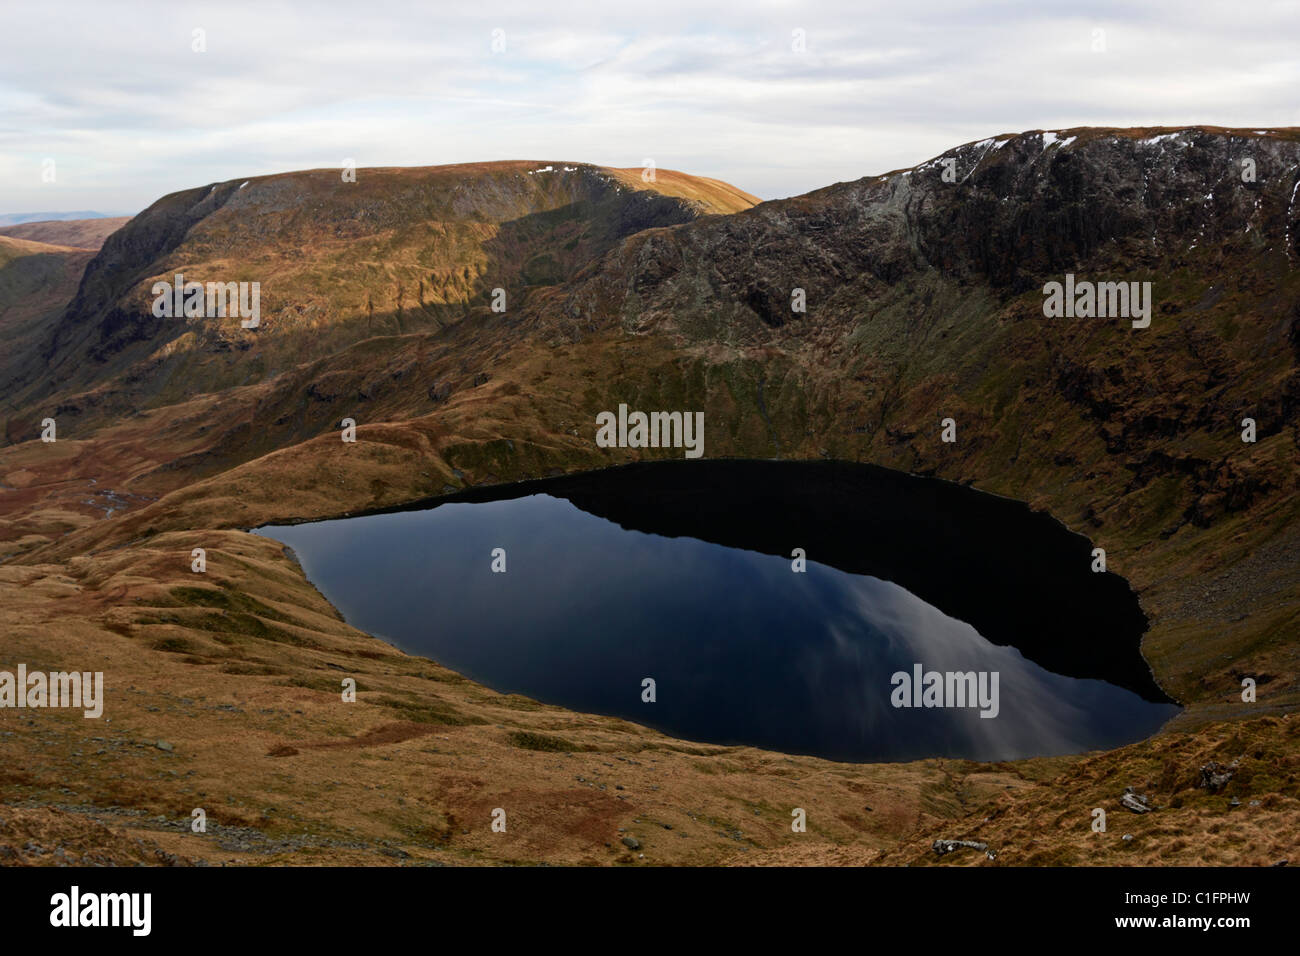 Blea Water on High street in the Lake District National Park, Cumbria, England. Stock Photo